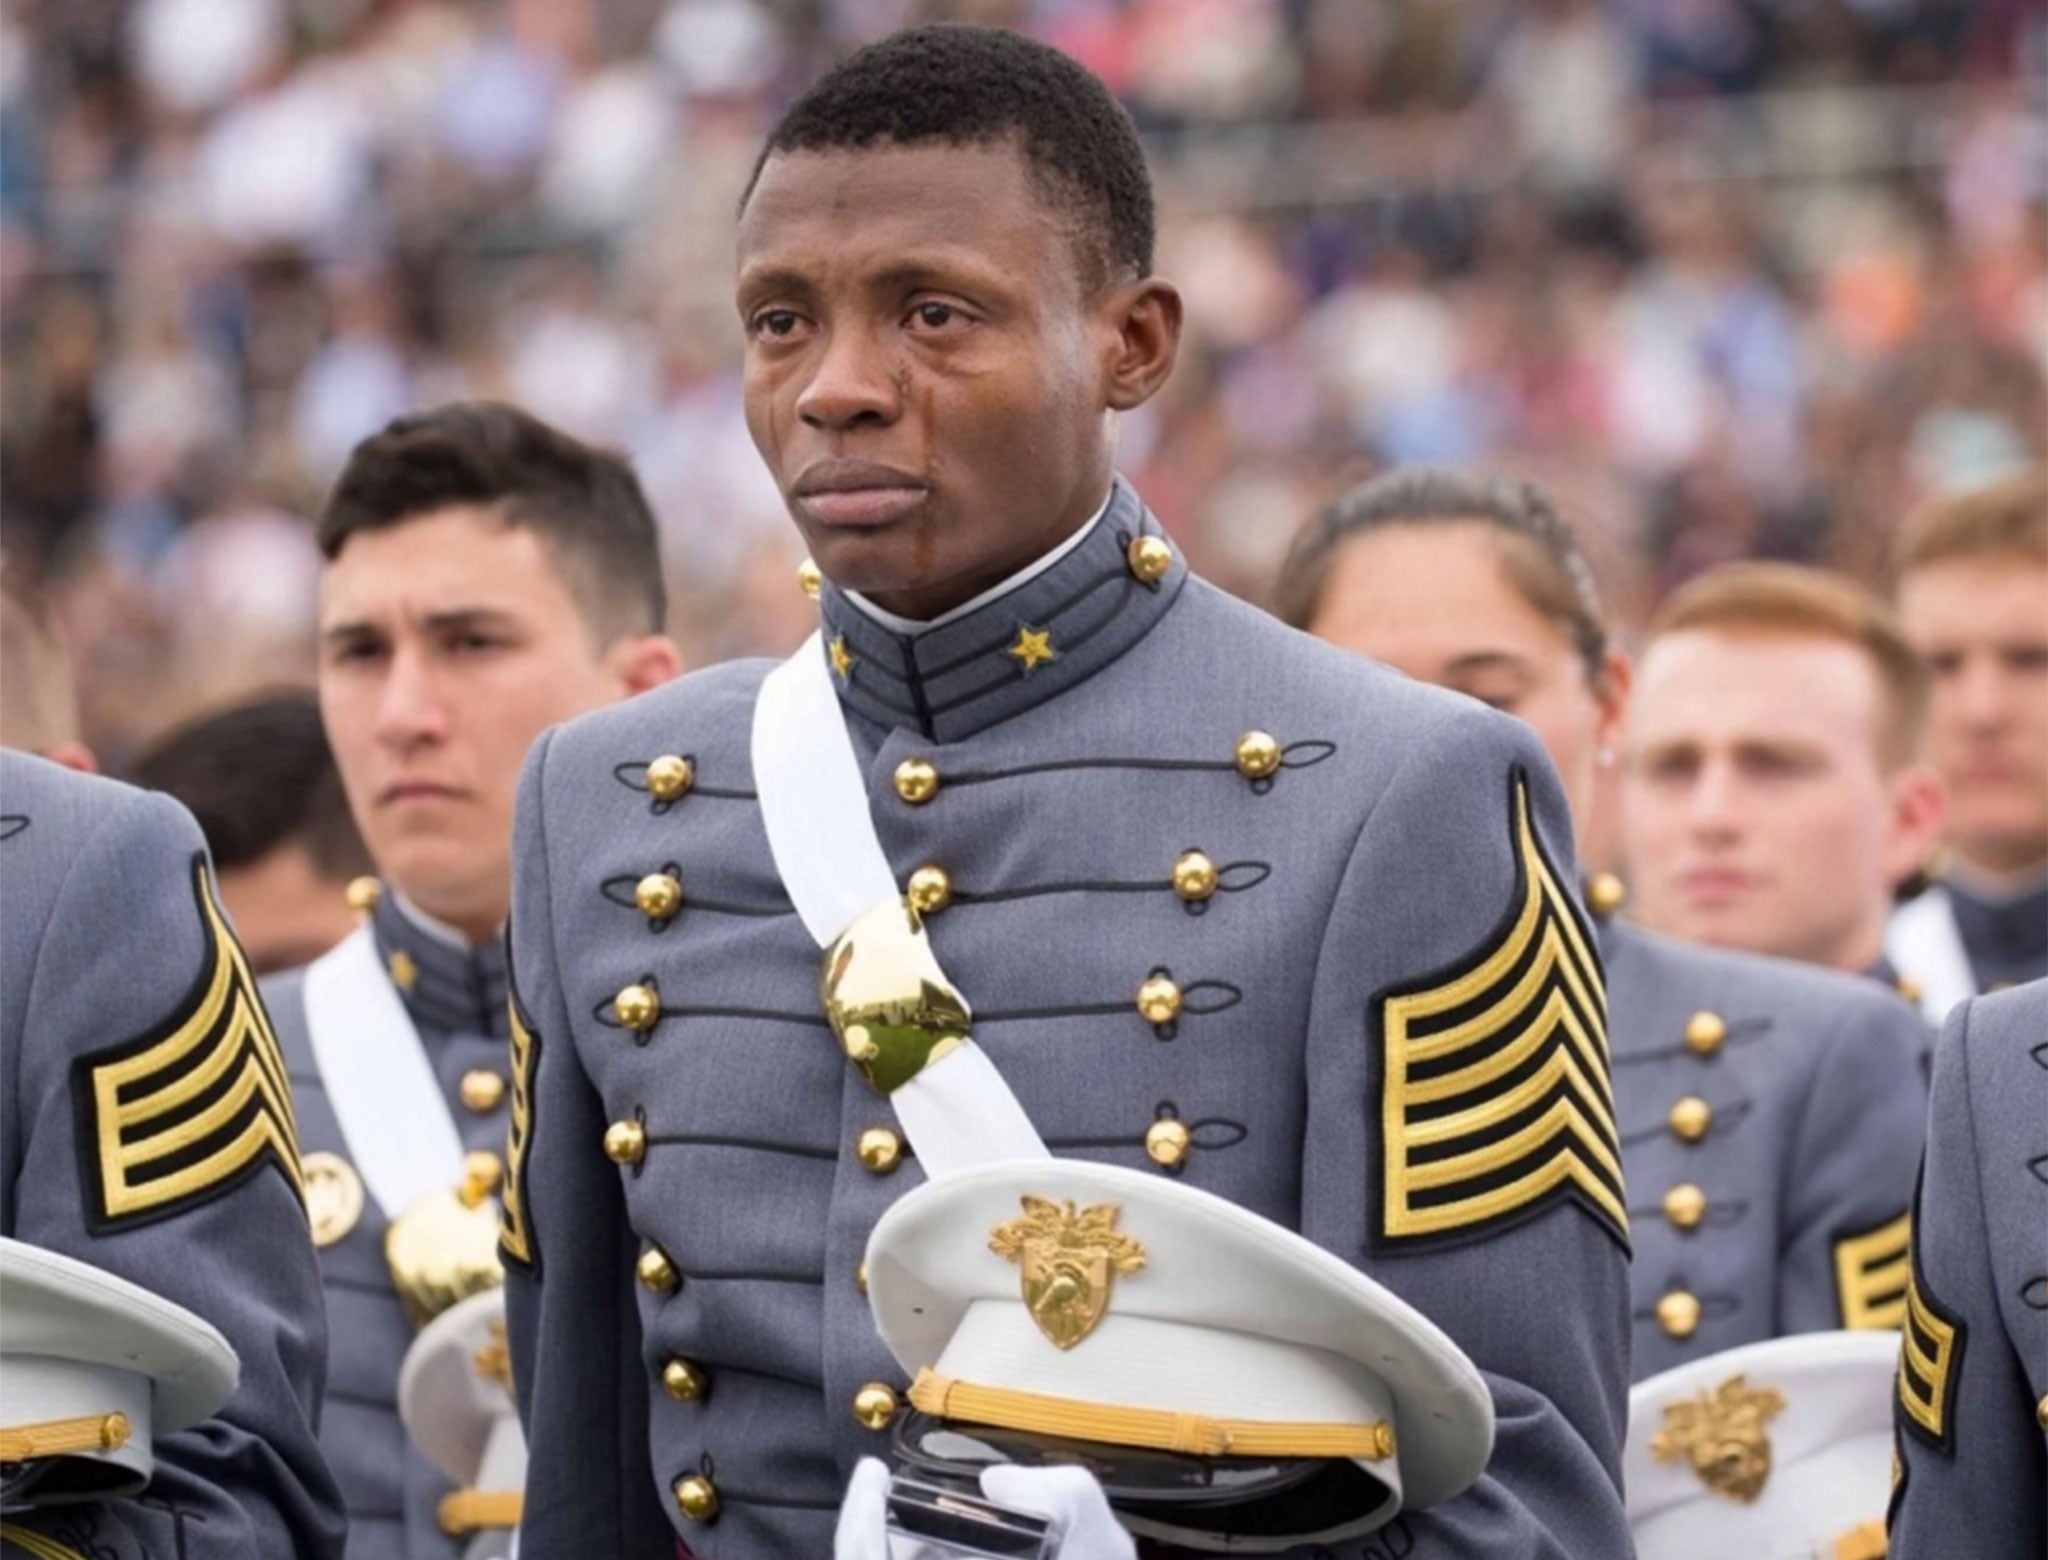 Tears stream down the face of West Point Cadet Alix Idrache during his commencement ceremony at the U.S. Military Academy